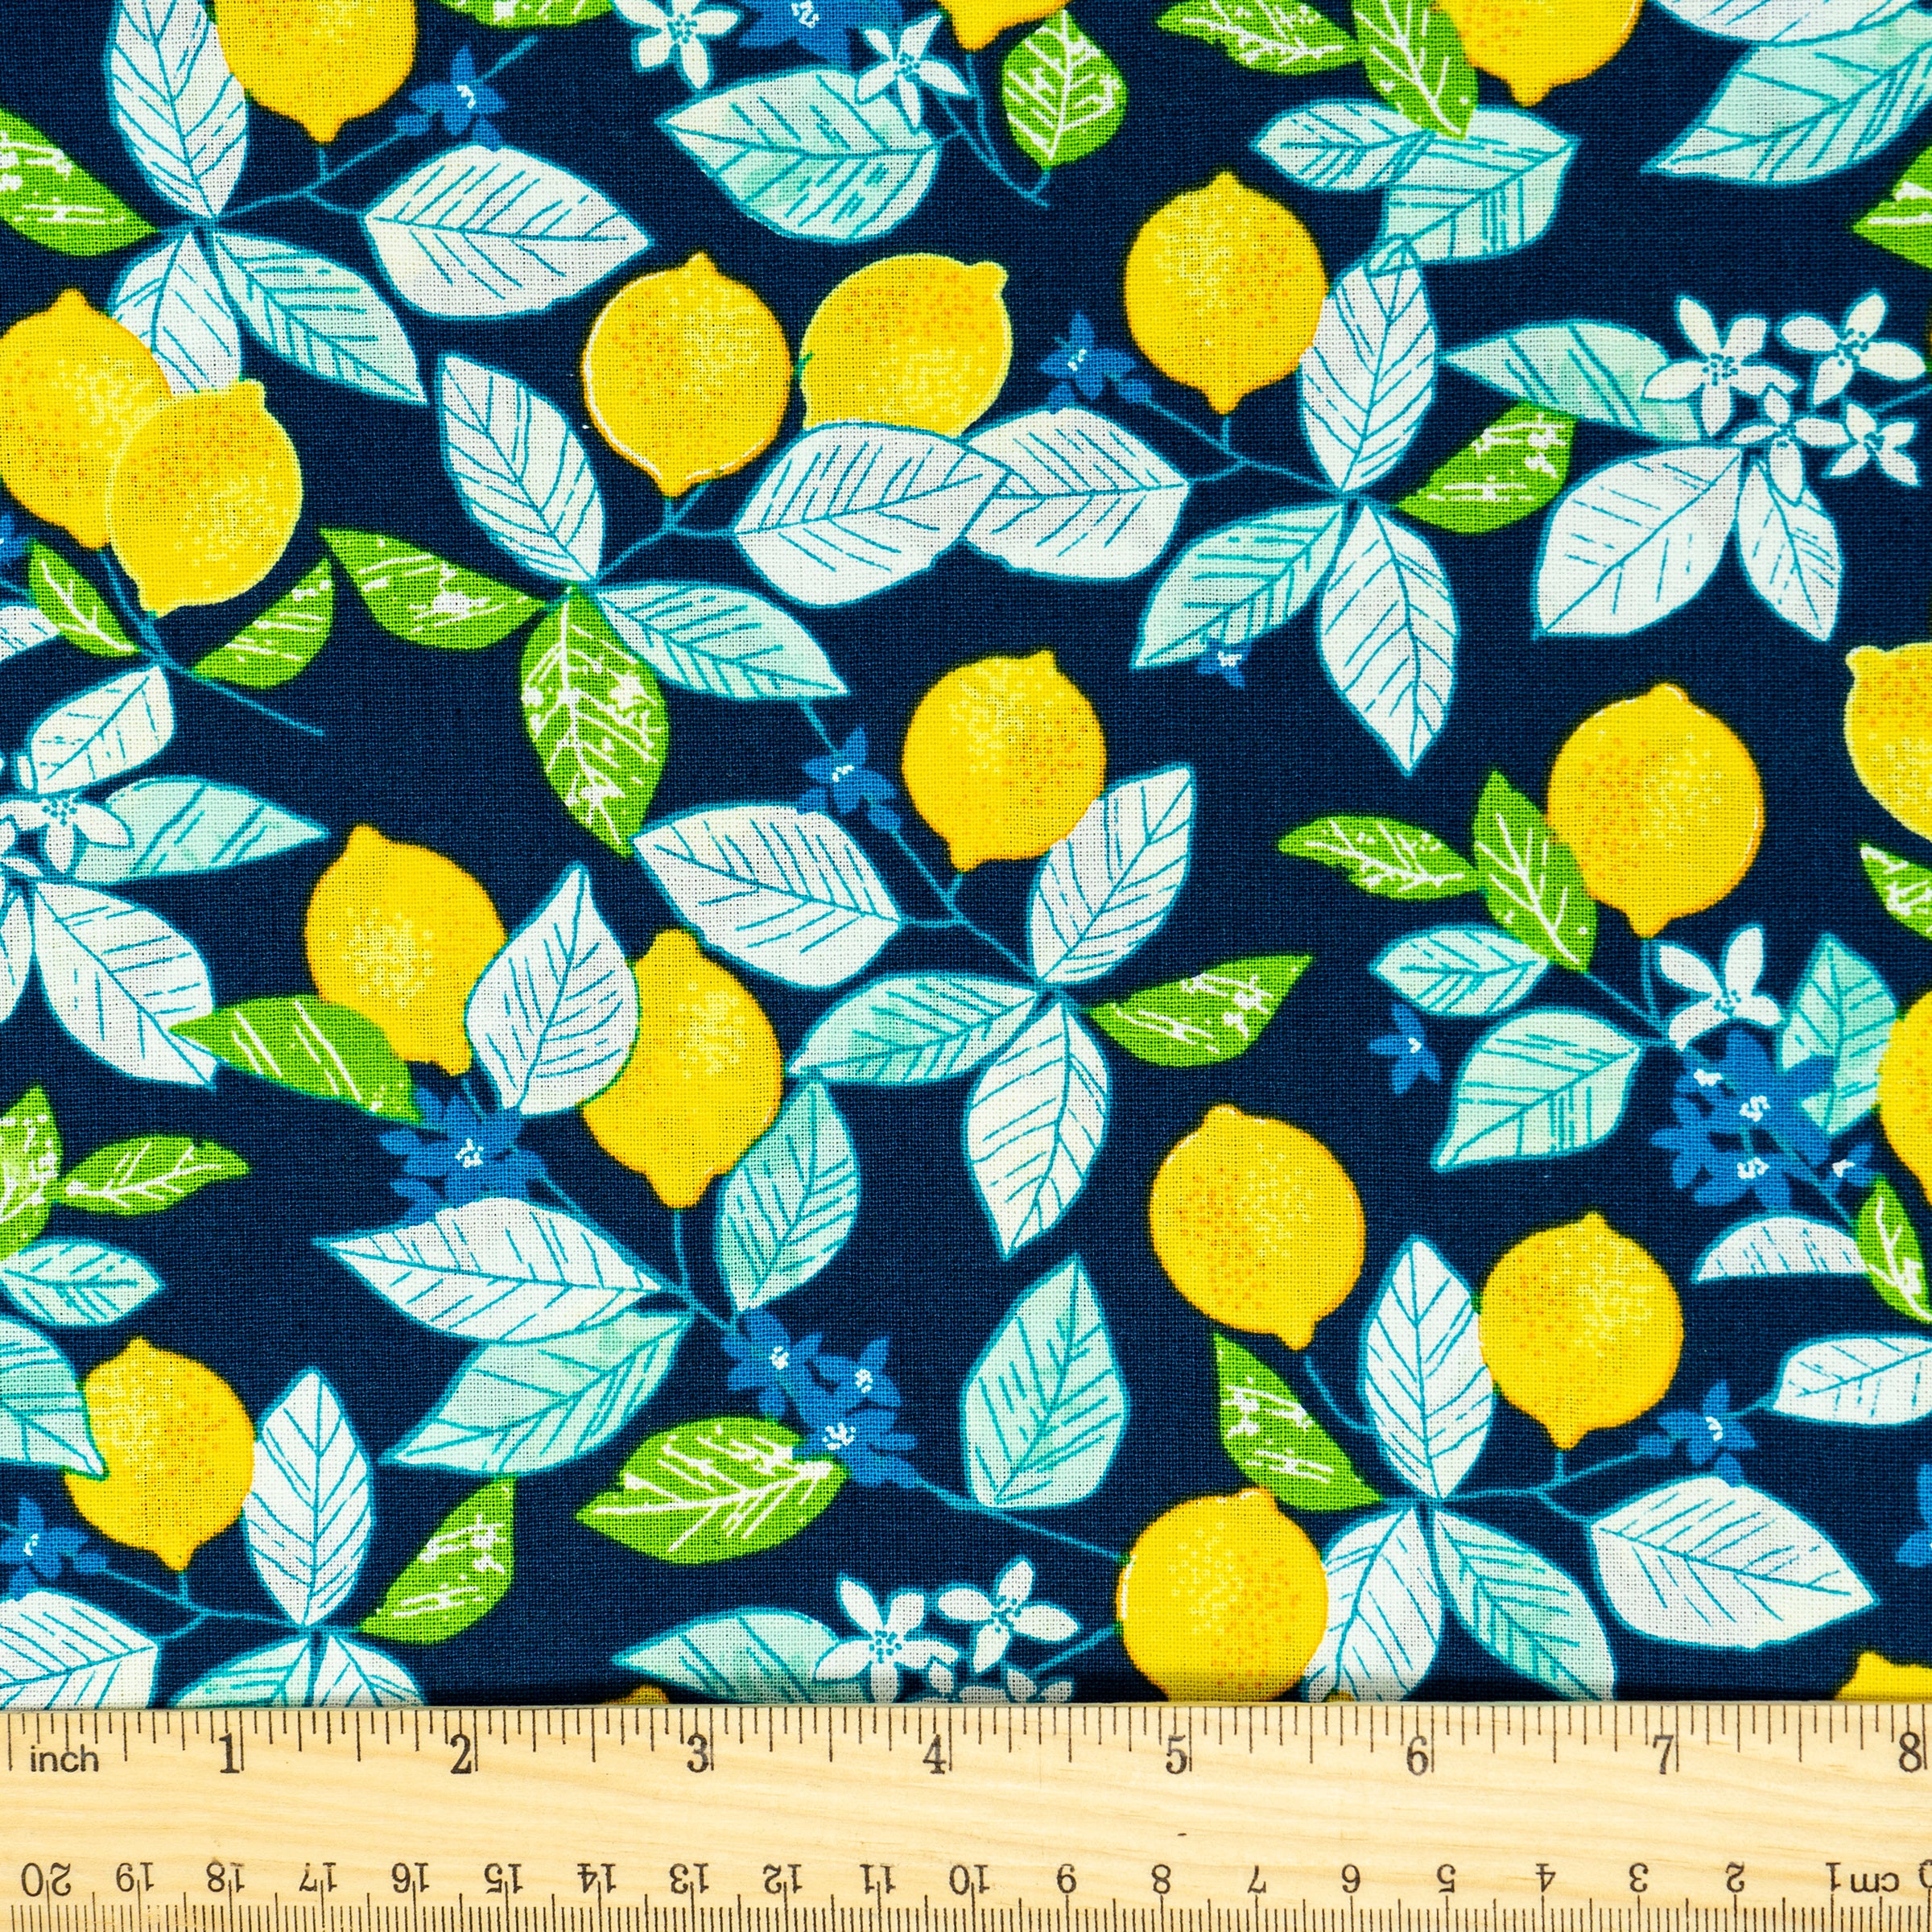 Waverly Inspirations 44" 100% Cotton Lemon Tree Sewing & Craft Fabric By the Yard, Blue, Yellow, Blue and Green